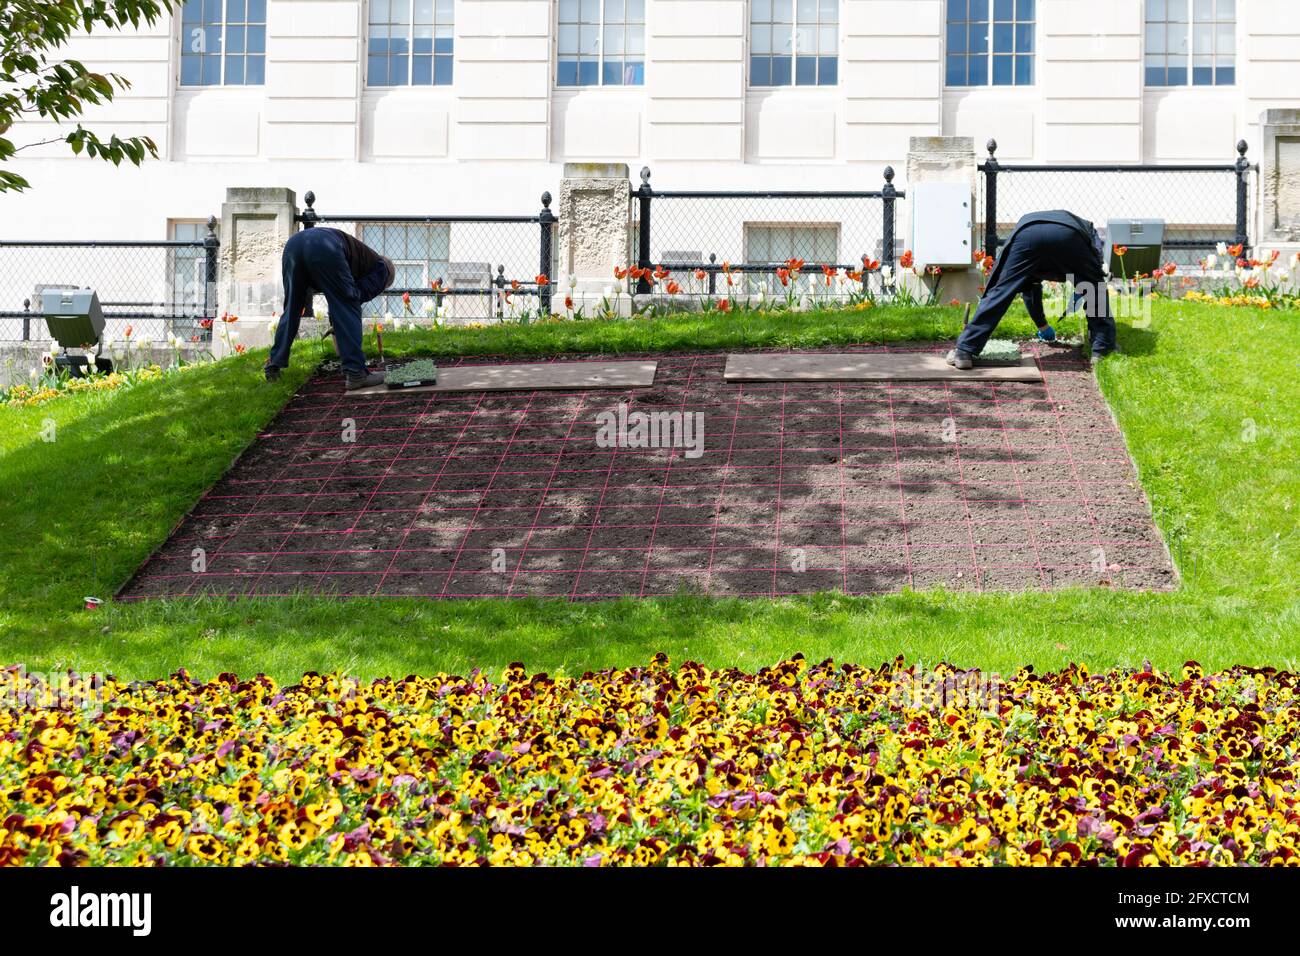 Gardeners planting bedding plants for a display outside Barnsley Town Hall using a grid marked out with string, Barnsley, South Yorkshire, England, UK Stock Photo